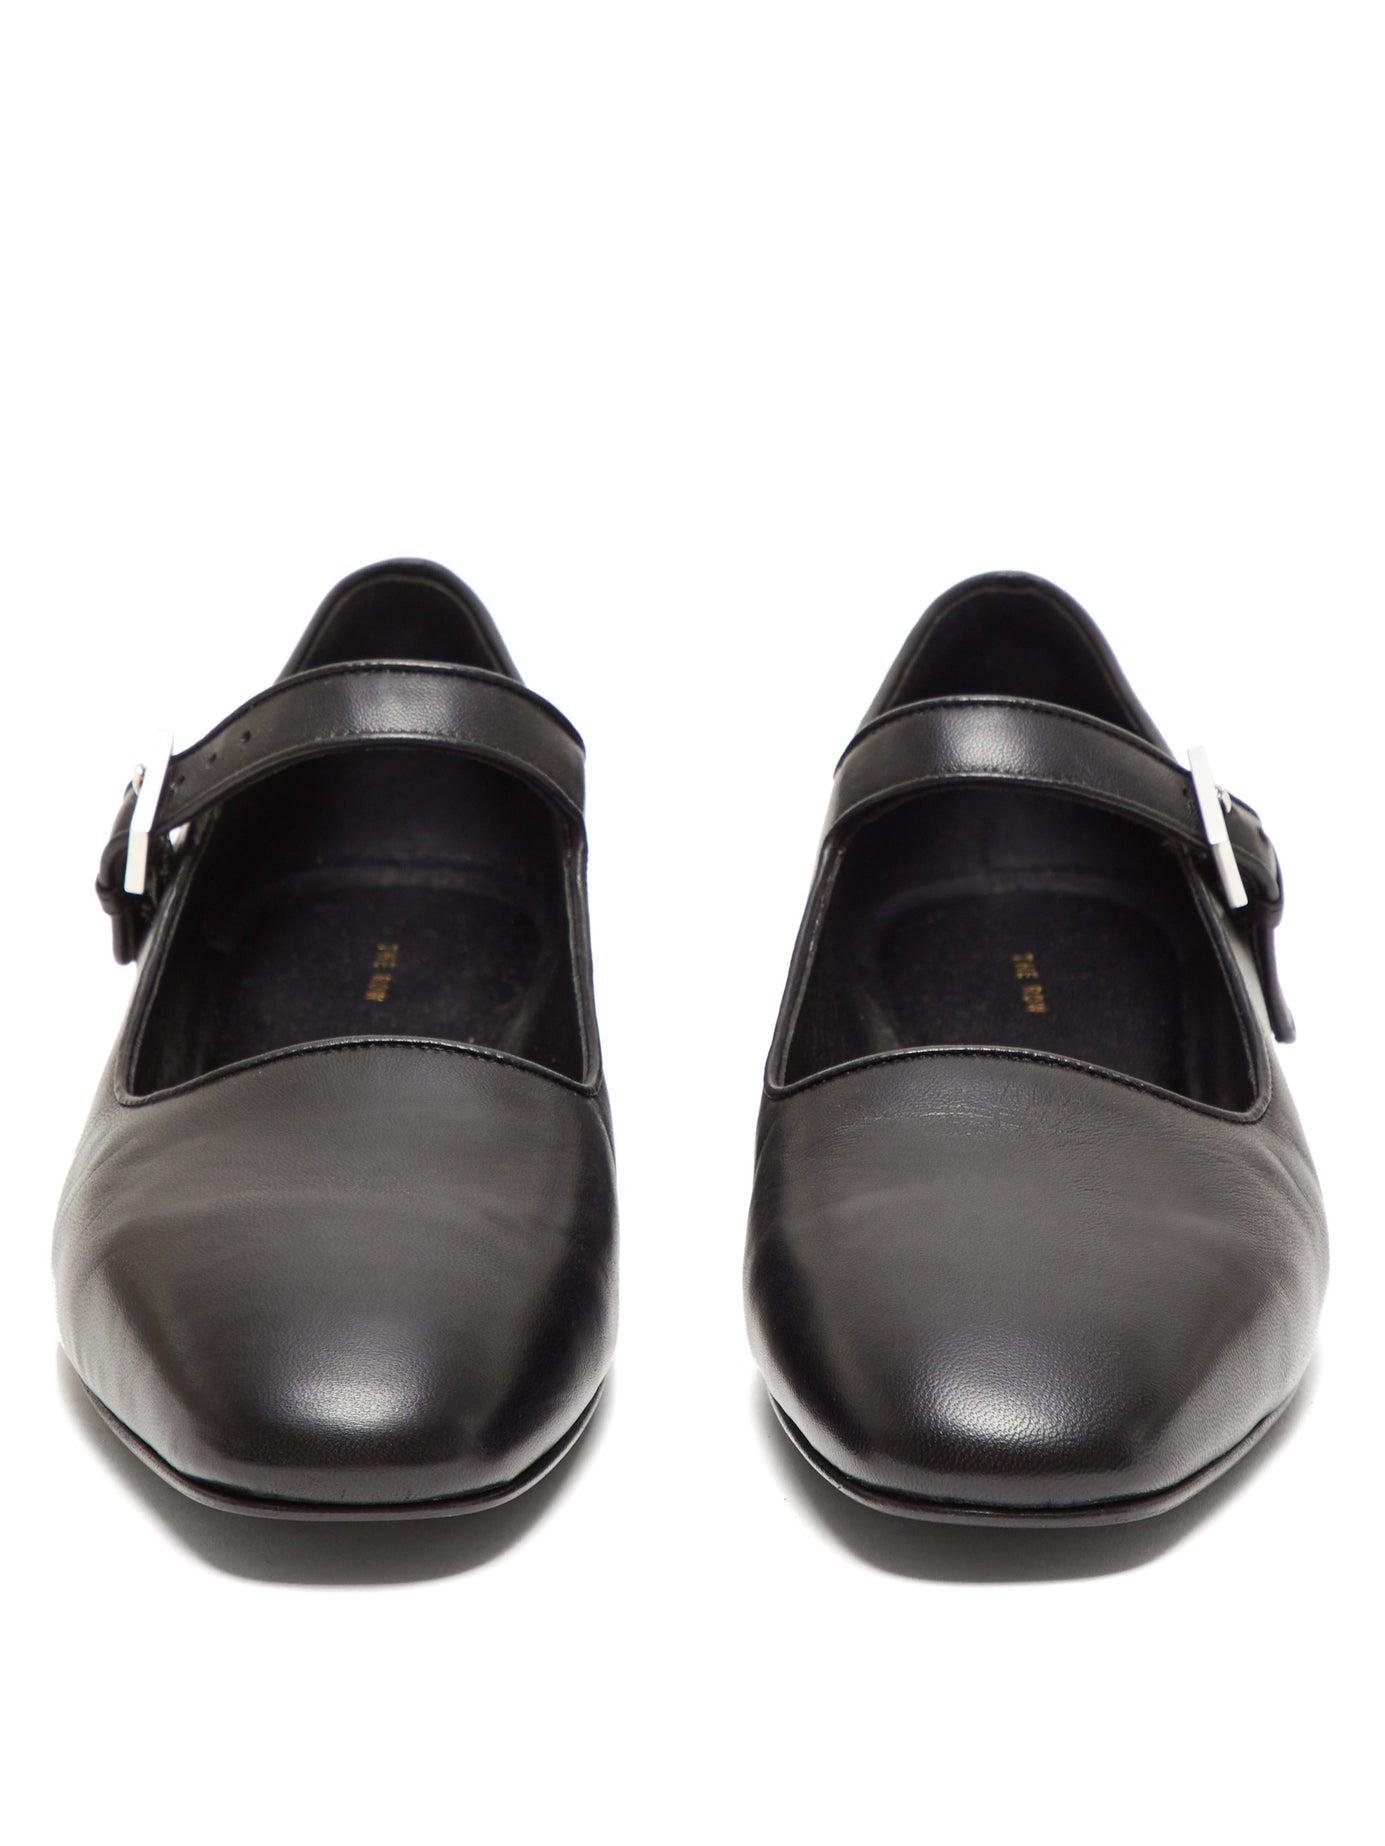 The Row Ava Square Toe Leather Mary Jane Flats in Black - Lyst